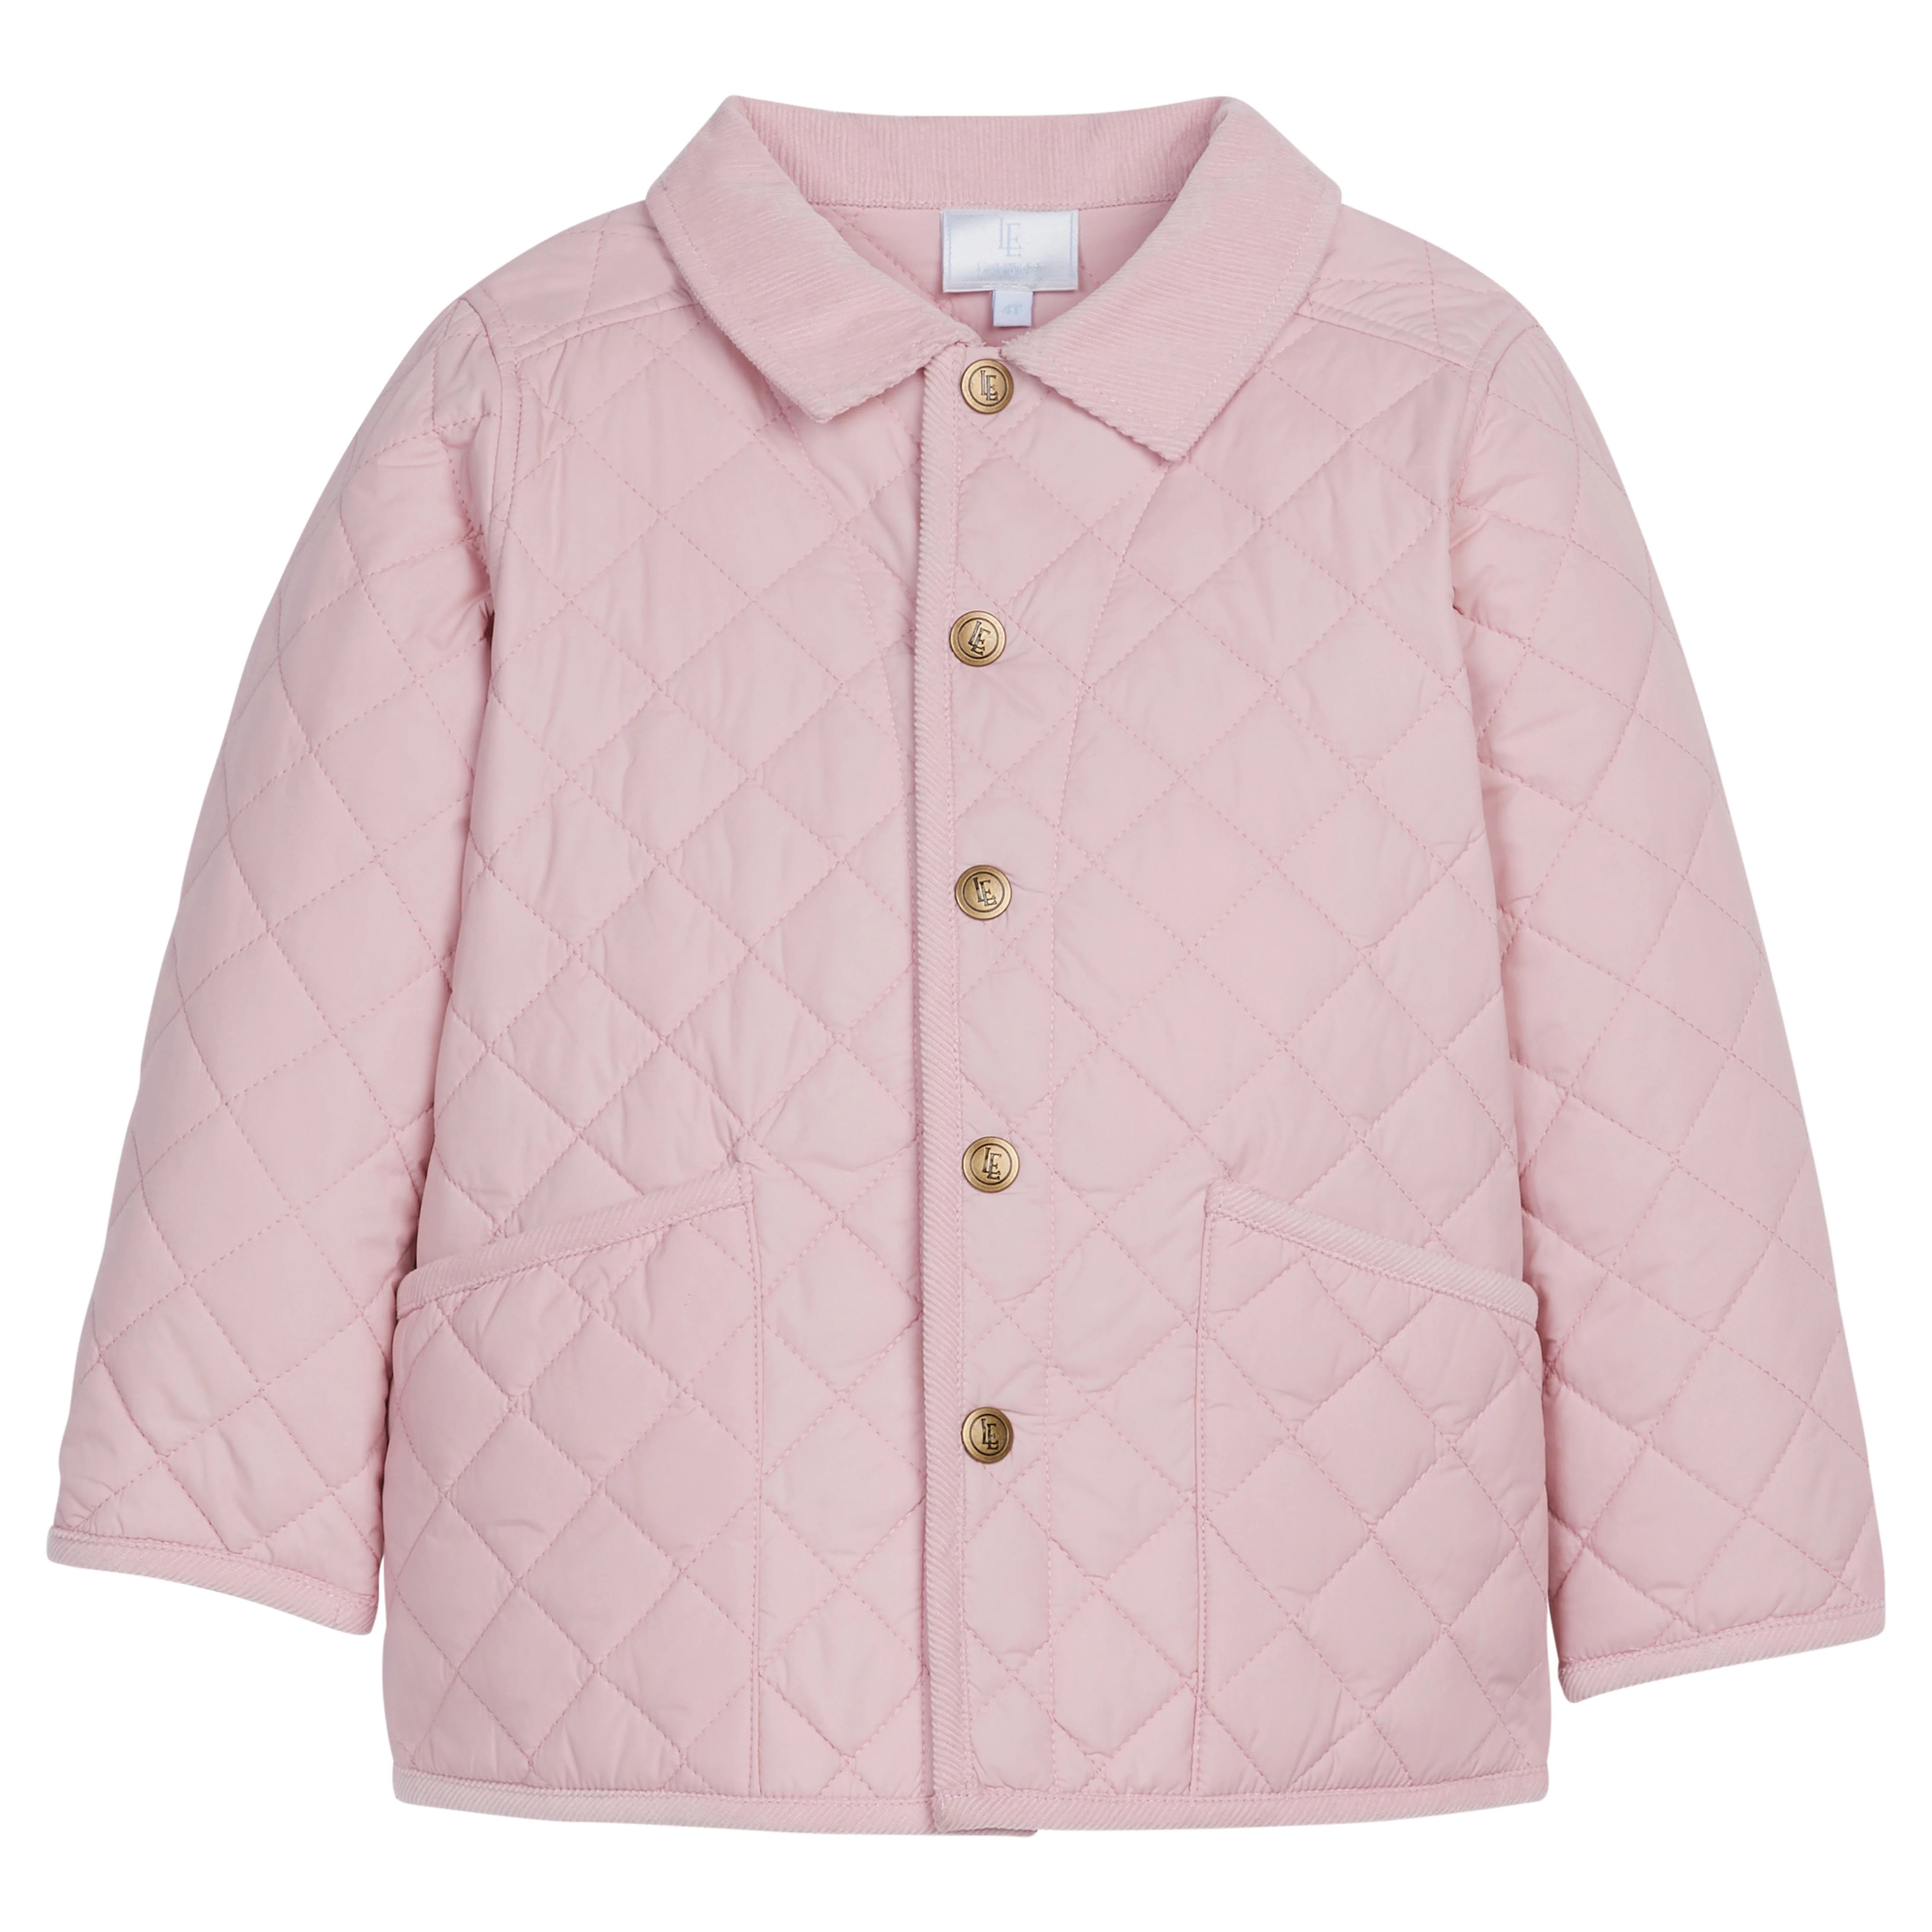 Girl's Pink Quilted Jacket - Kids Outerwear | Little English